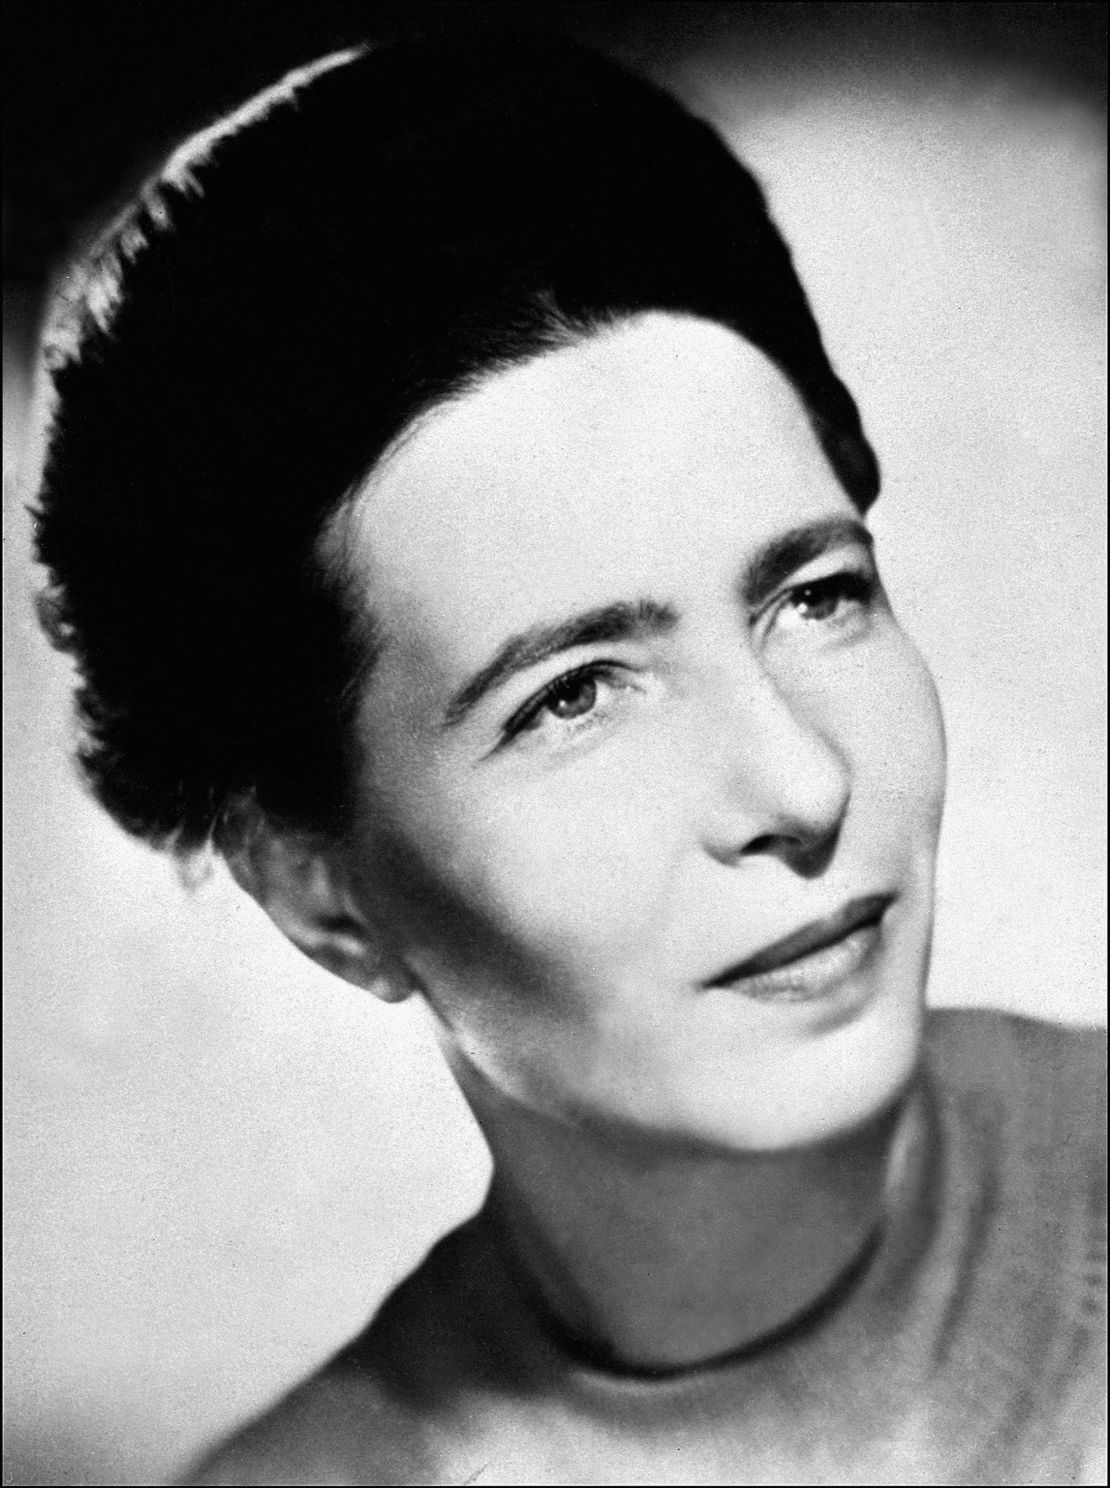 Simone de Beauvoir's best-selling book "The Second Sex" is often seen as a pivotal text in feminist philosophy.